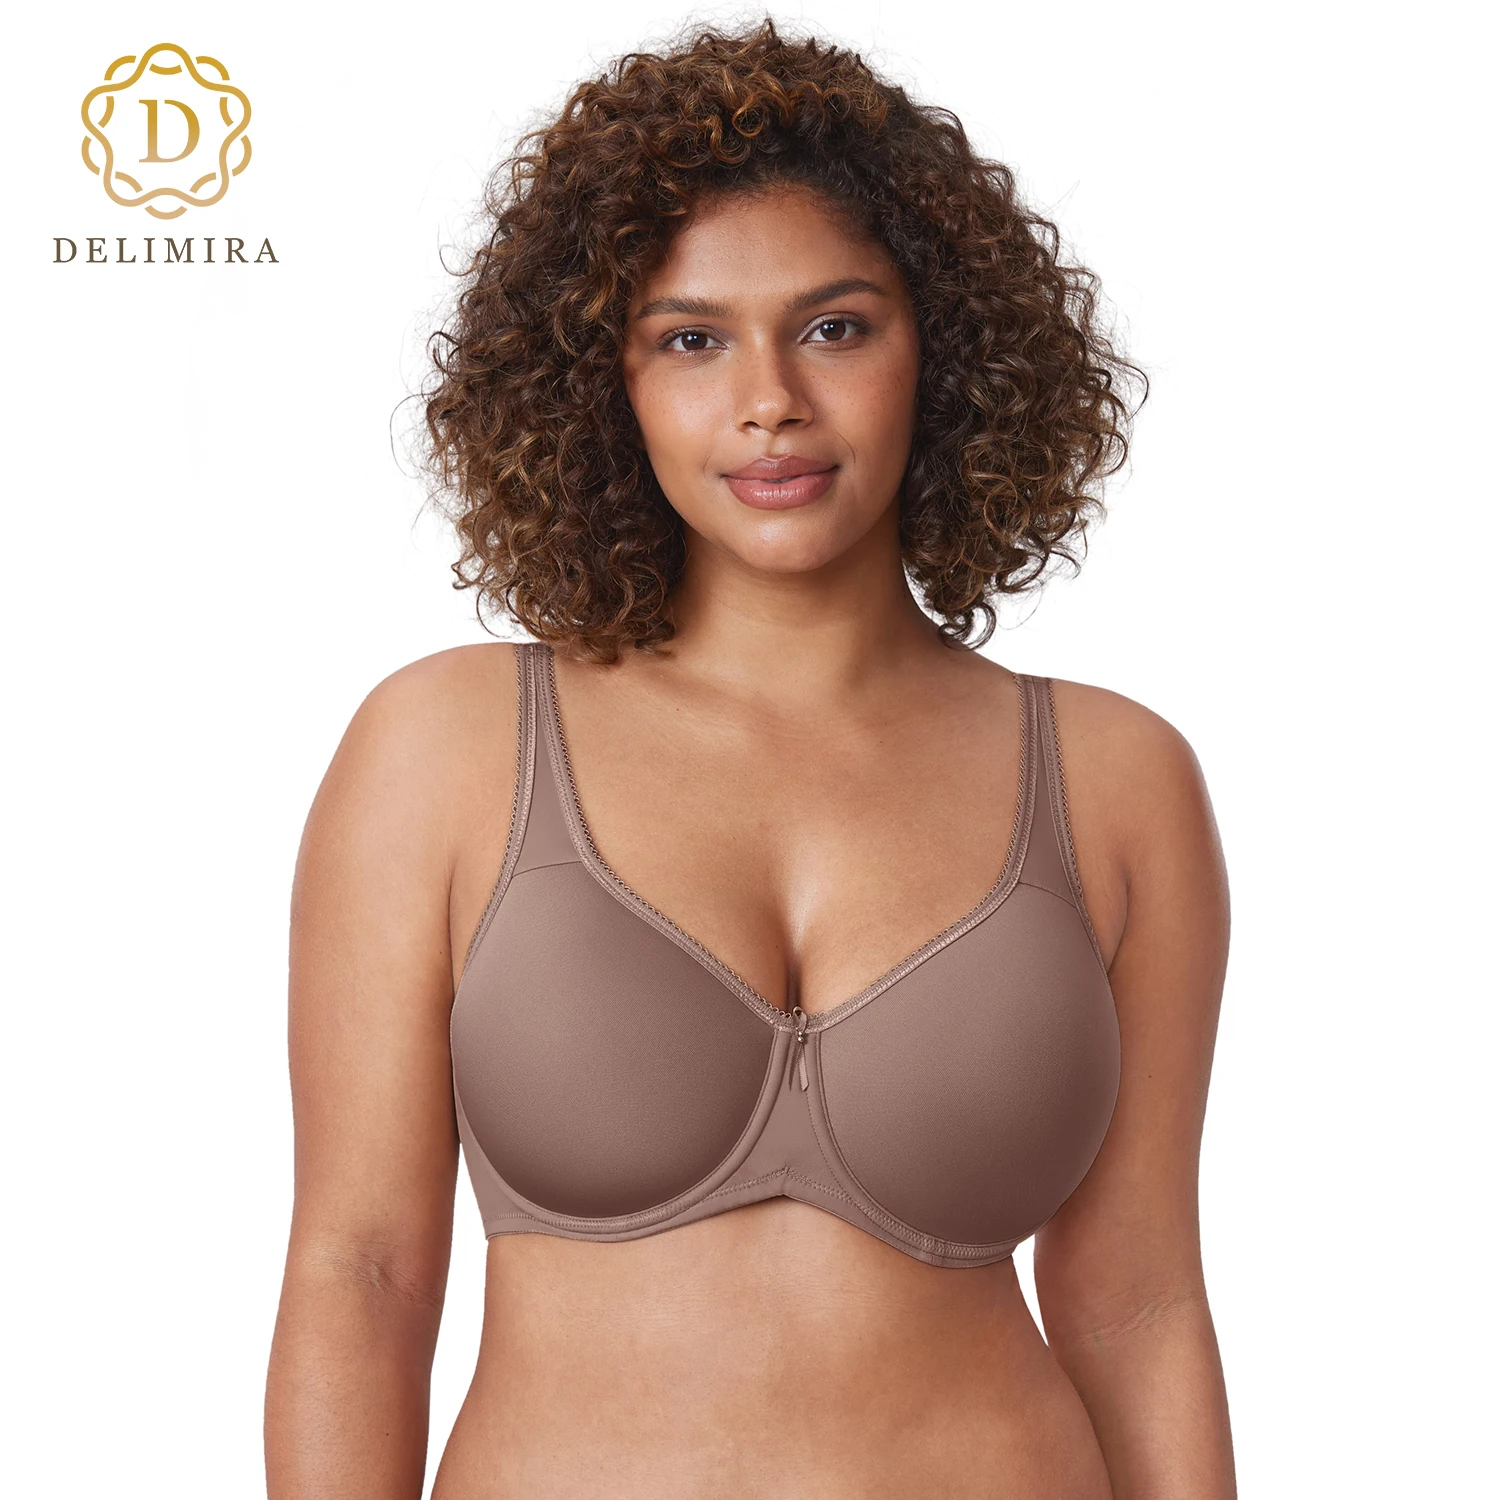 

DELIMIRA Women's T-Shirt Full Coverage Plus Size Seamless Padded Underwire Supportive Molded Smooth Bra D DD E F